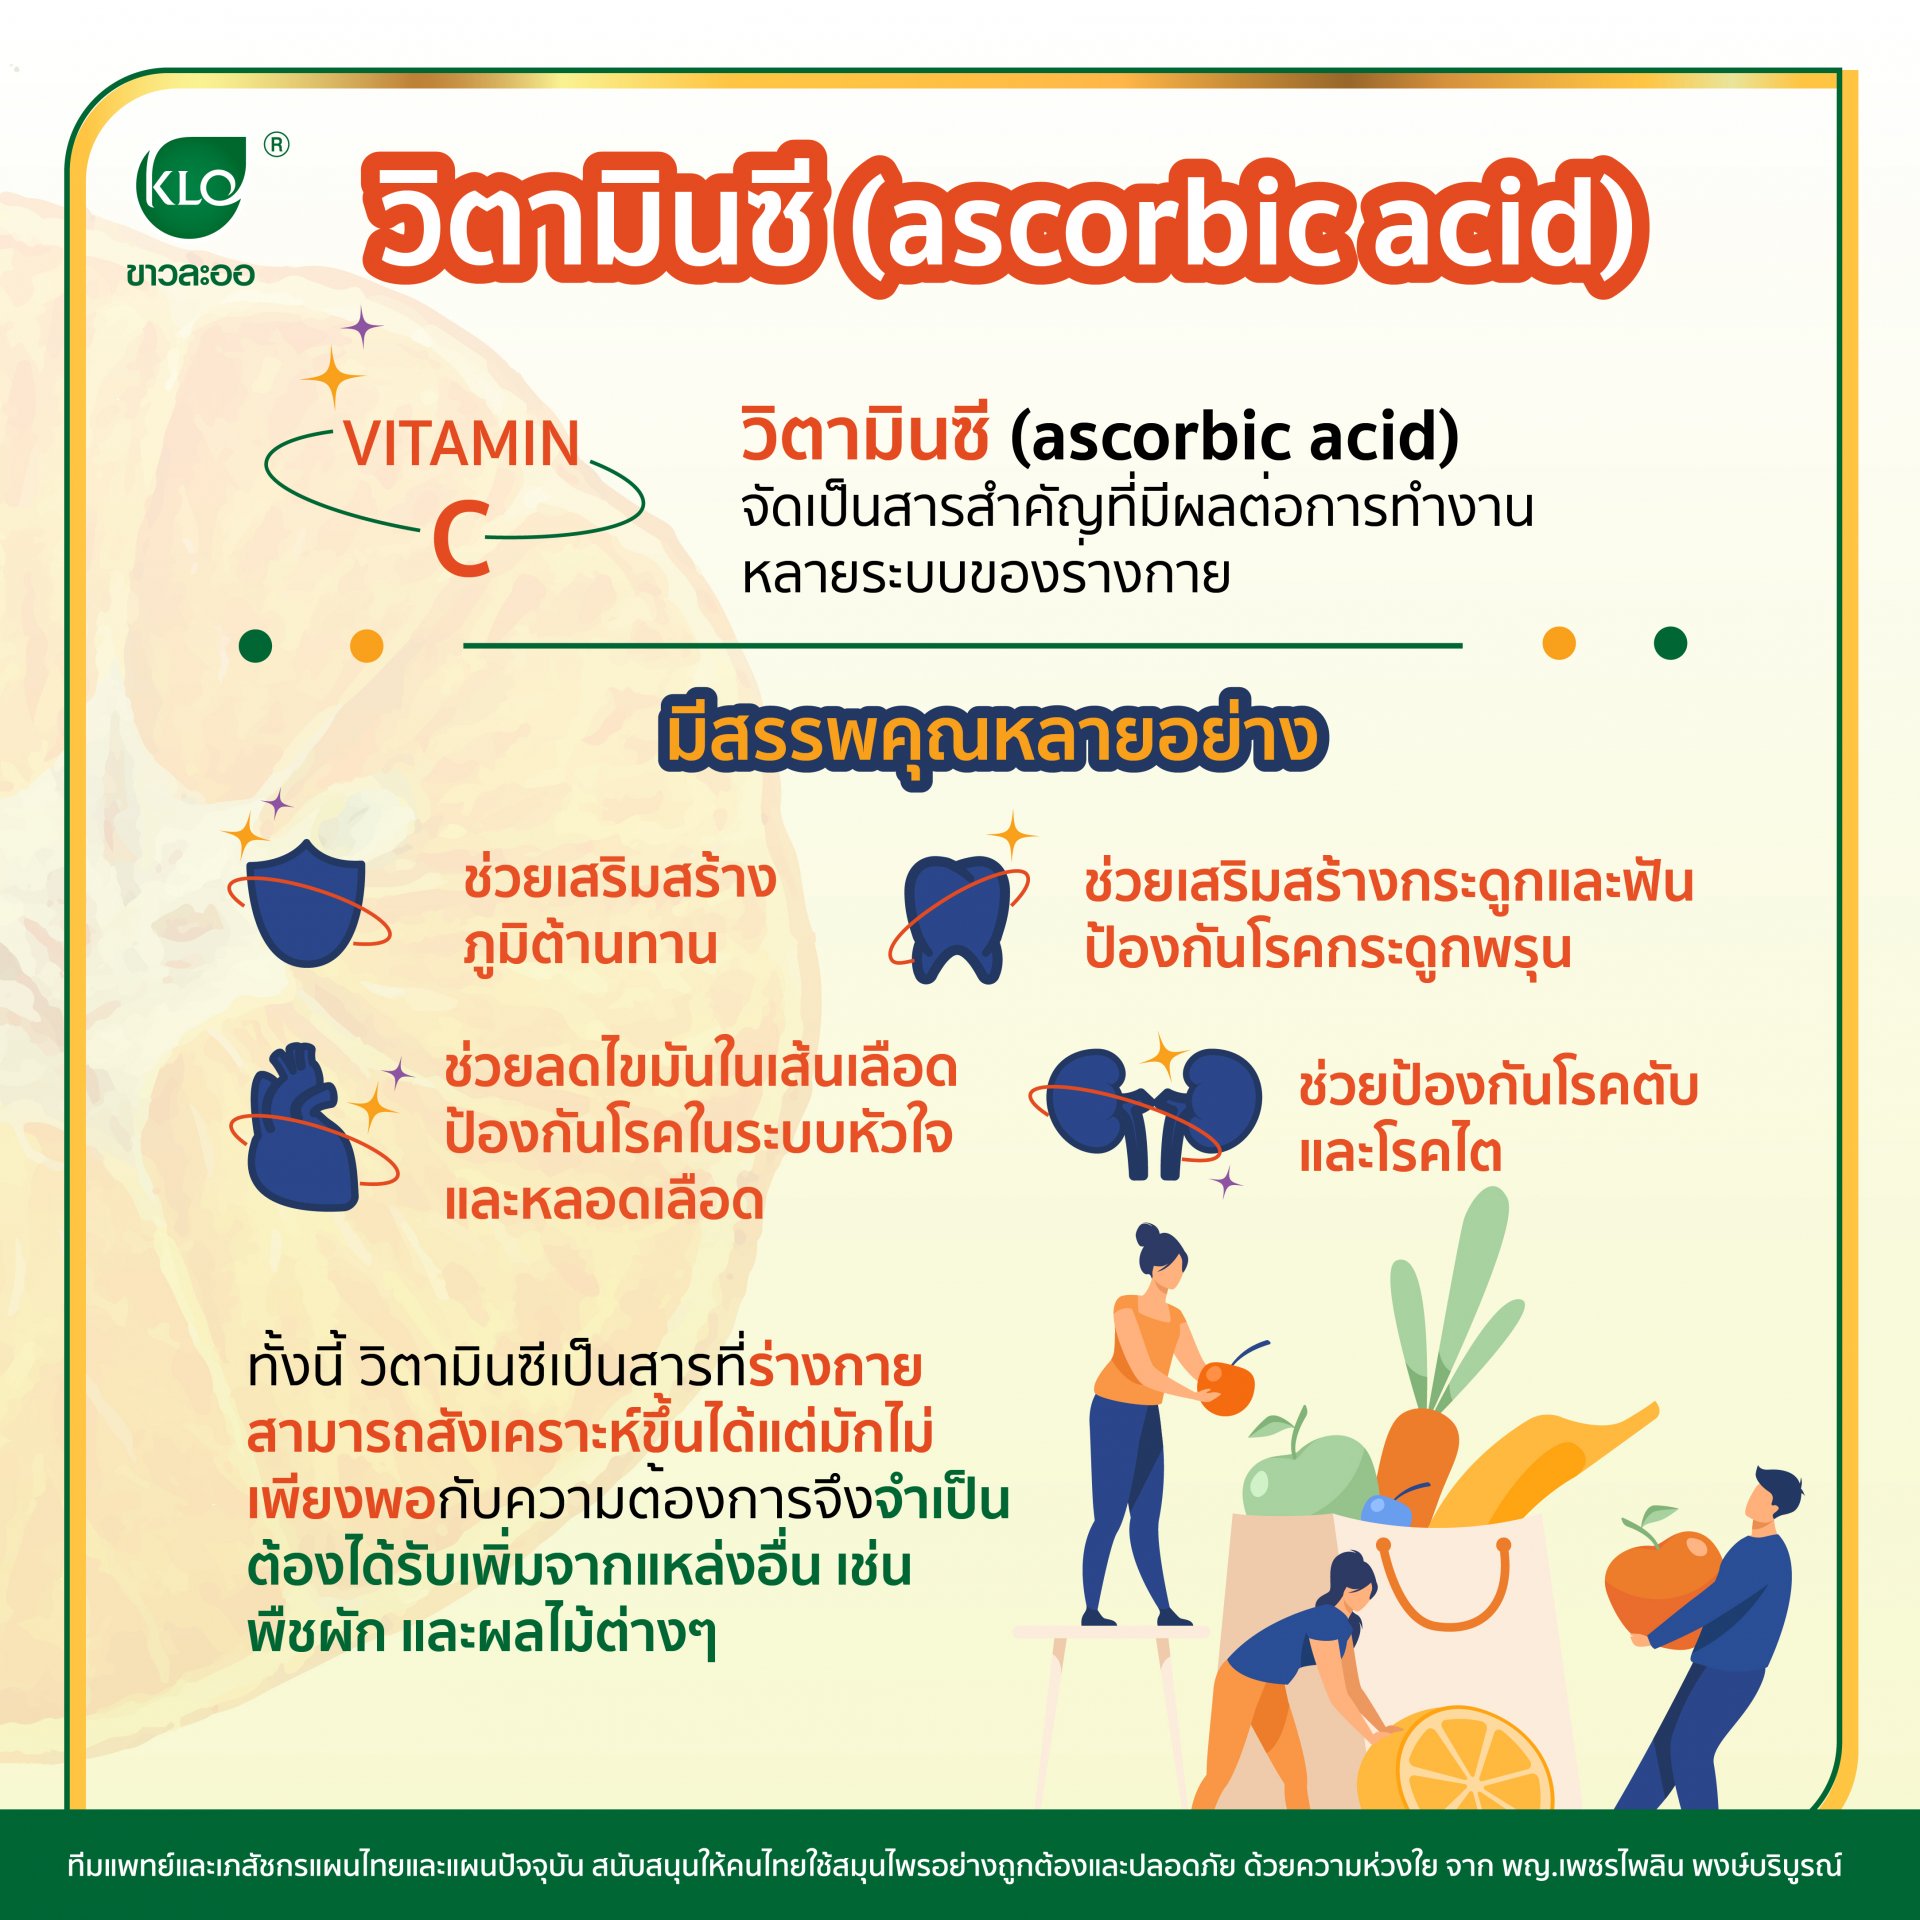 Vitamin C (ascorbic acid) is an important substance that affects the functions of many systems of the body.